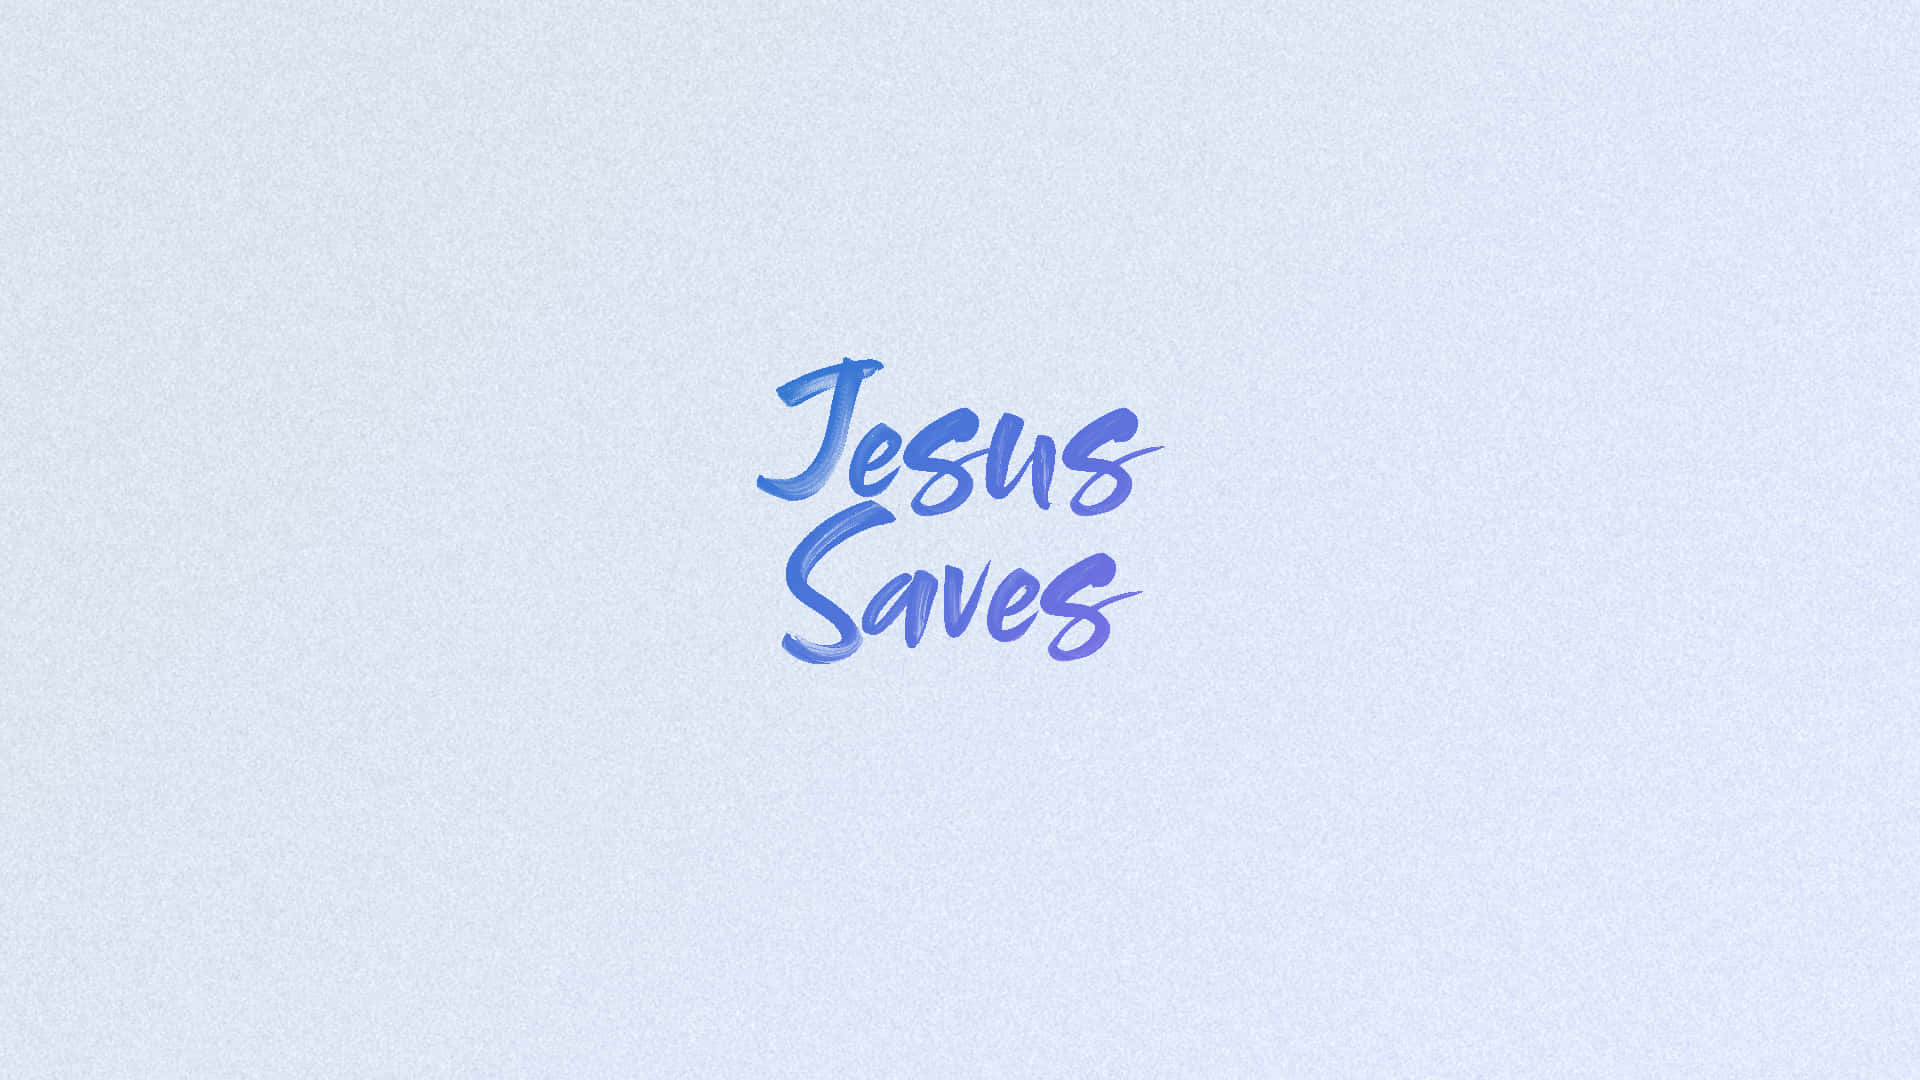 Jesus Saves- The one and only path to salvation Wallpaper